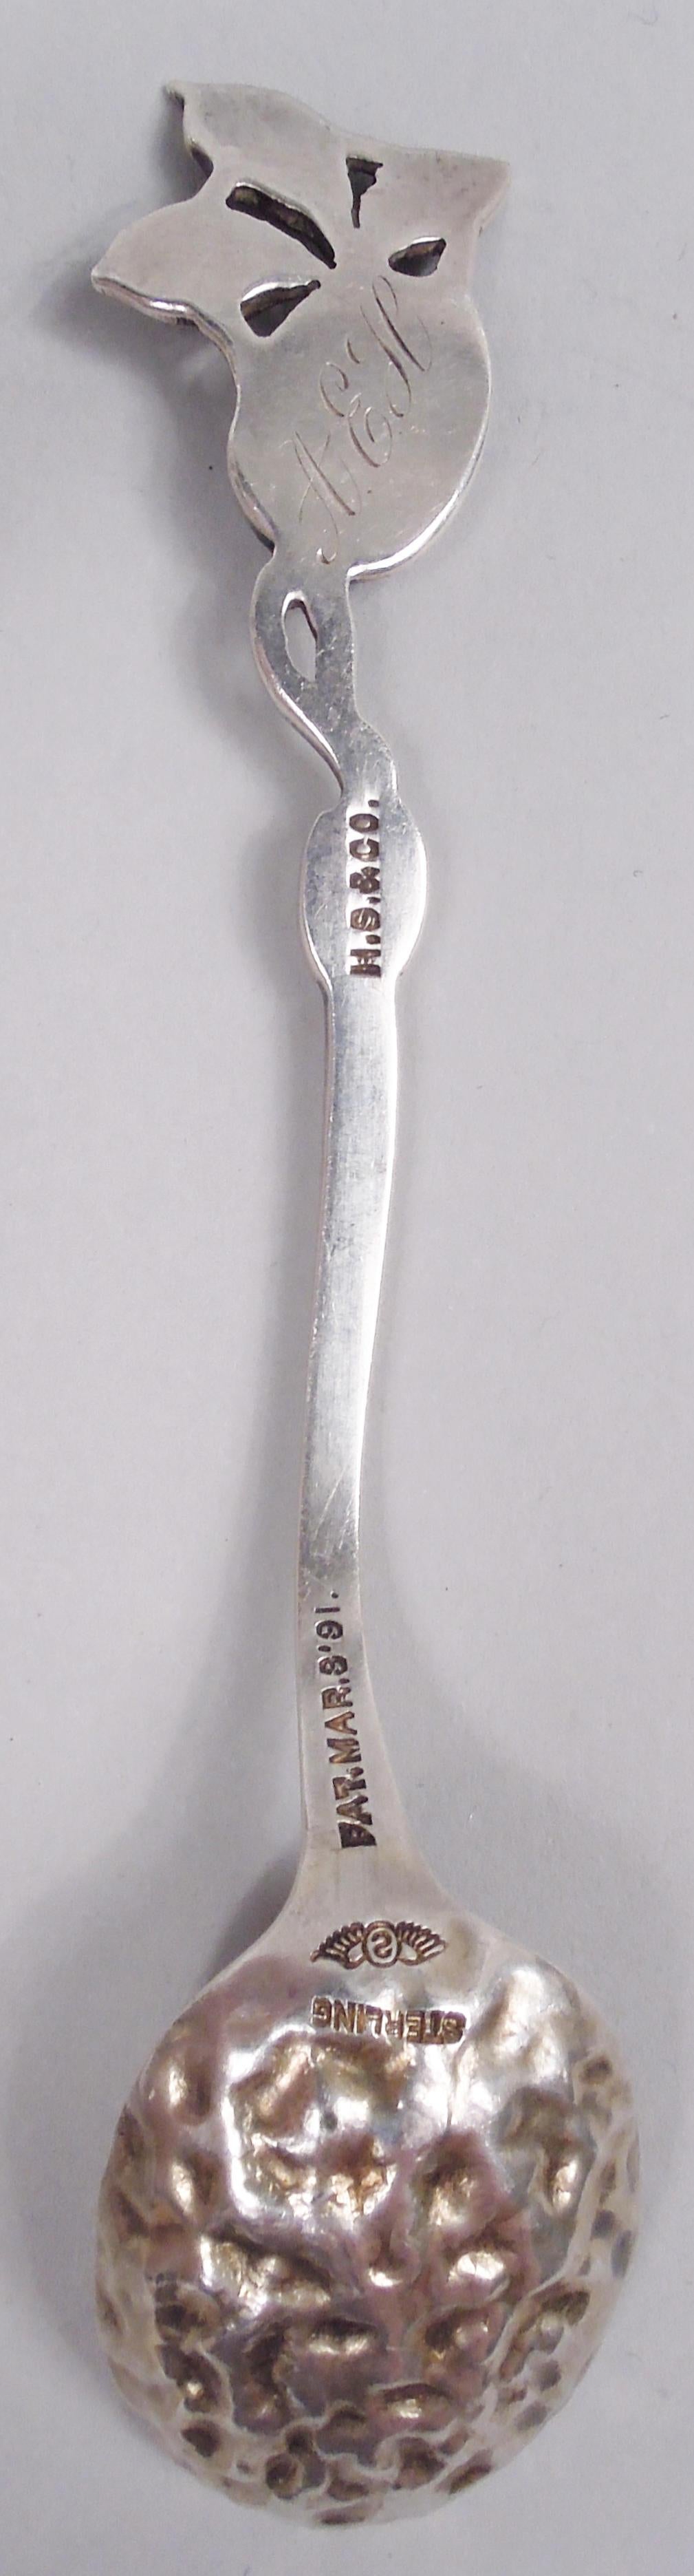 Two Antique Shiebler American Sterling Silver Novelty Spoons For Sale 2